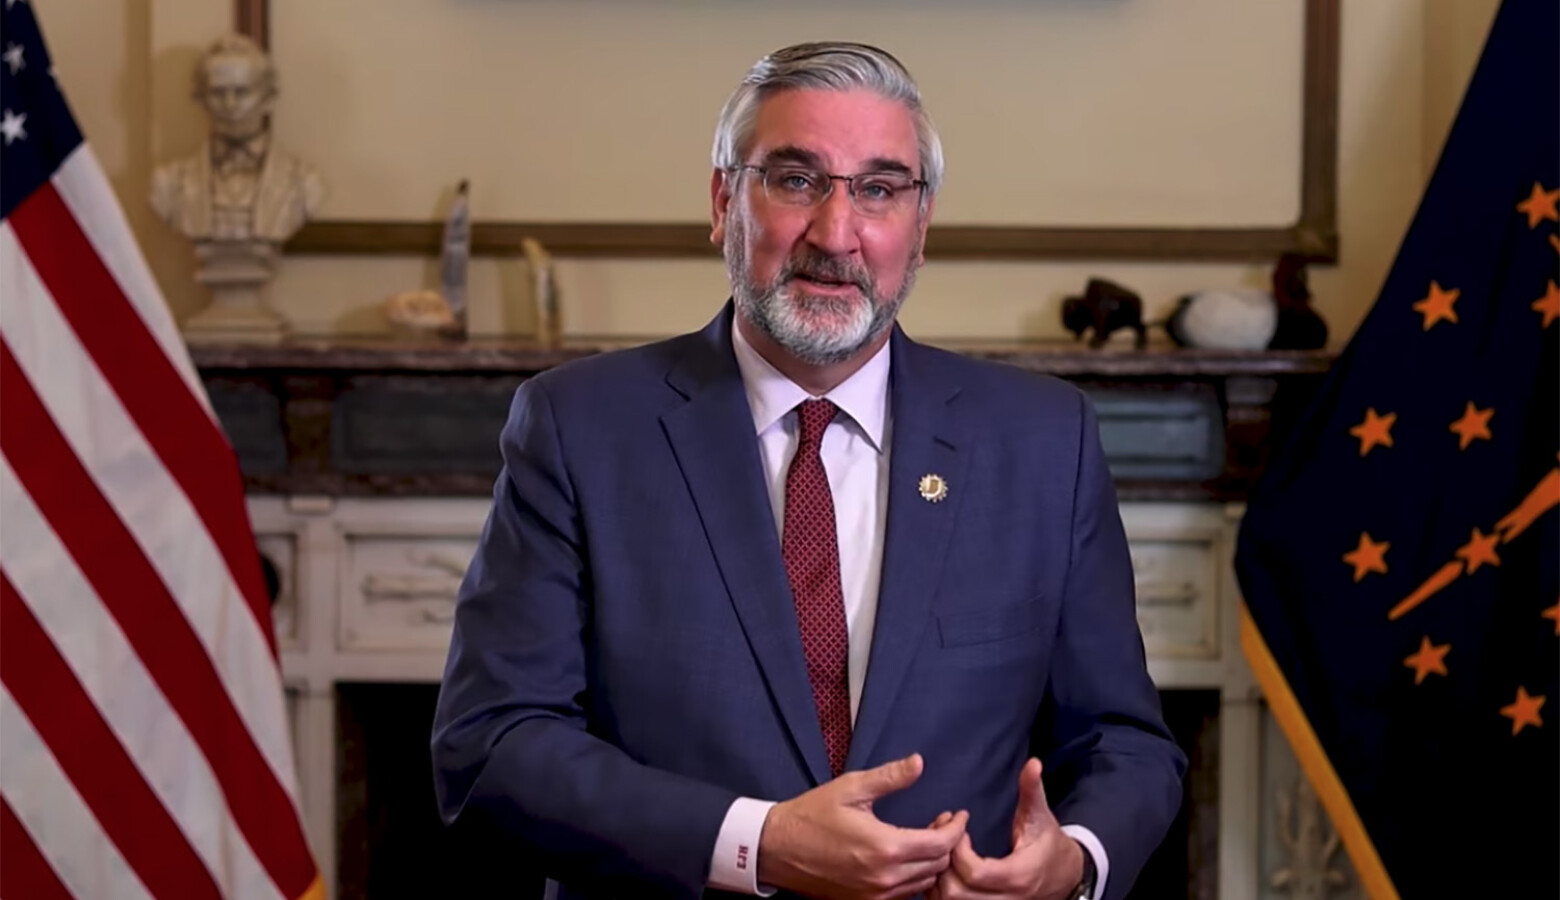 Gov. Eric Holcomb discusses his 2021 agenda in a pre-recorded video for the Dentons Legislative Conference. (Governor Eric Holcomb/YouTube)